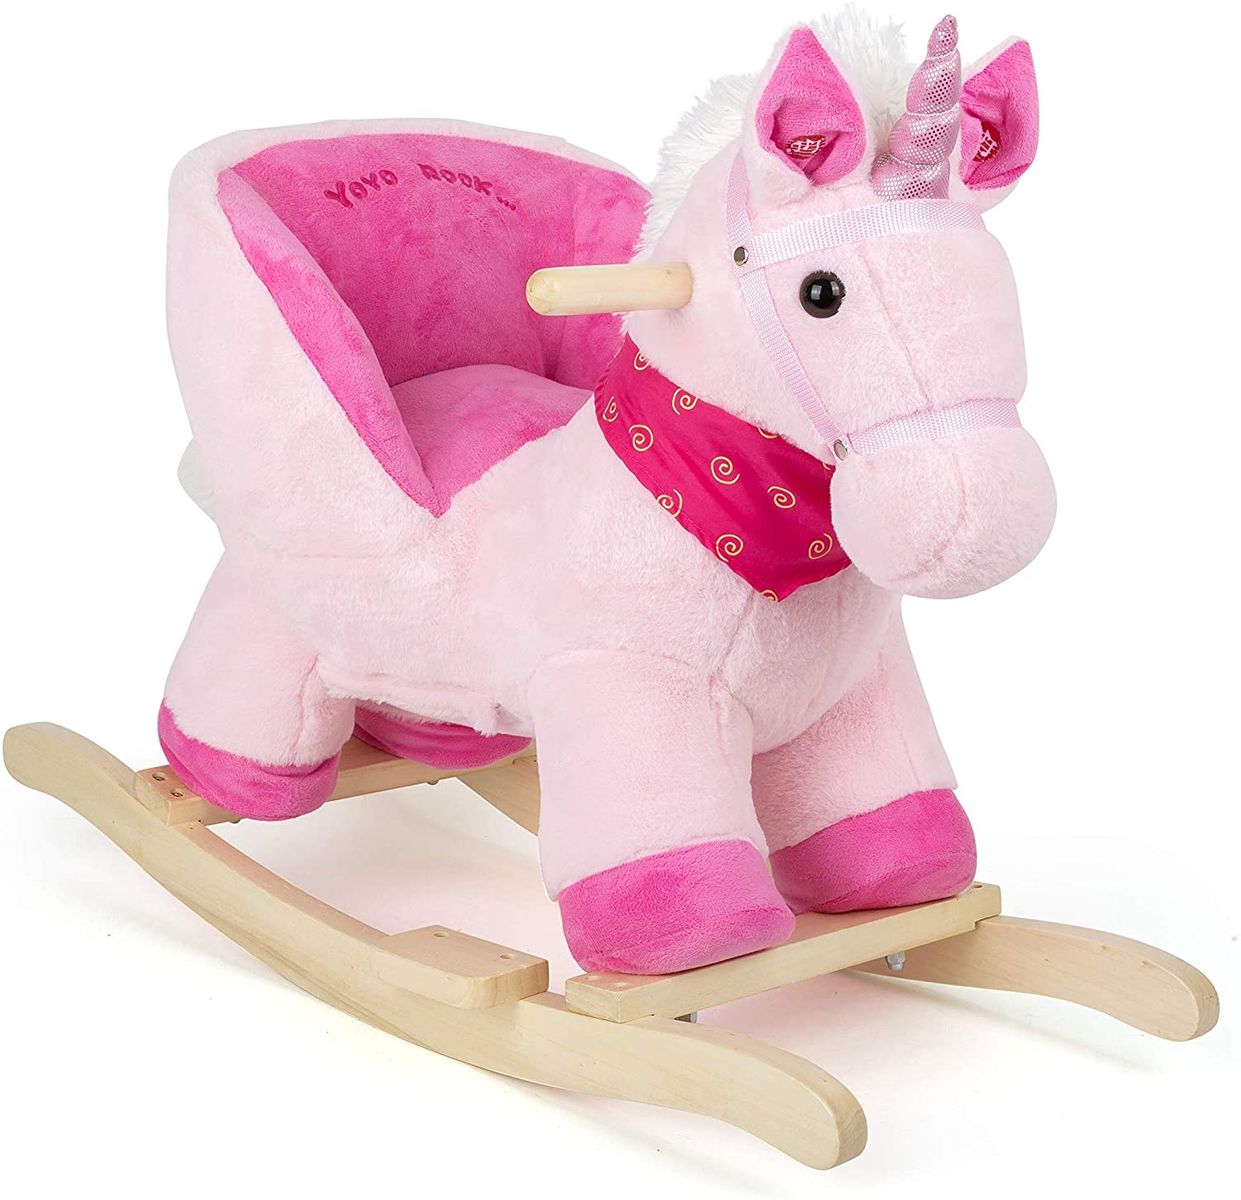 Small Foot 11181 Rocking unicorn with sound, seat height 30 cm, loadable up to approx. 25 kg toy, pink unicorn rocking horse